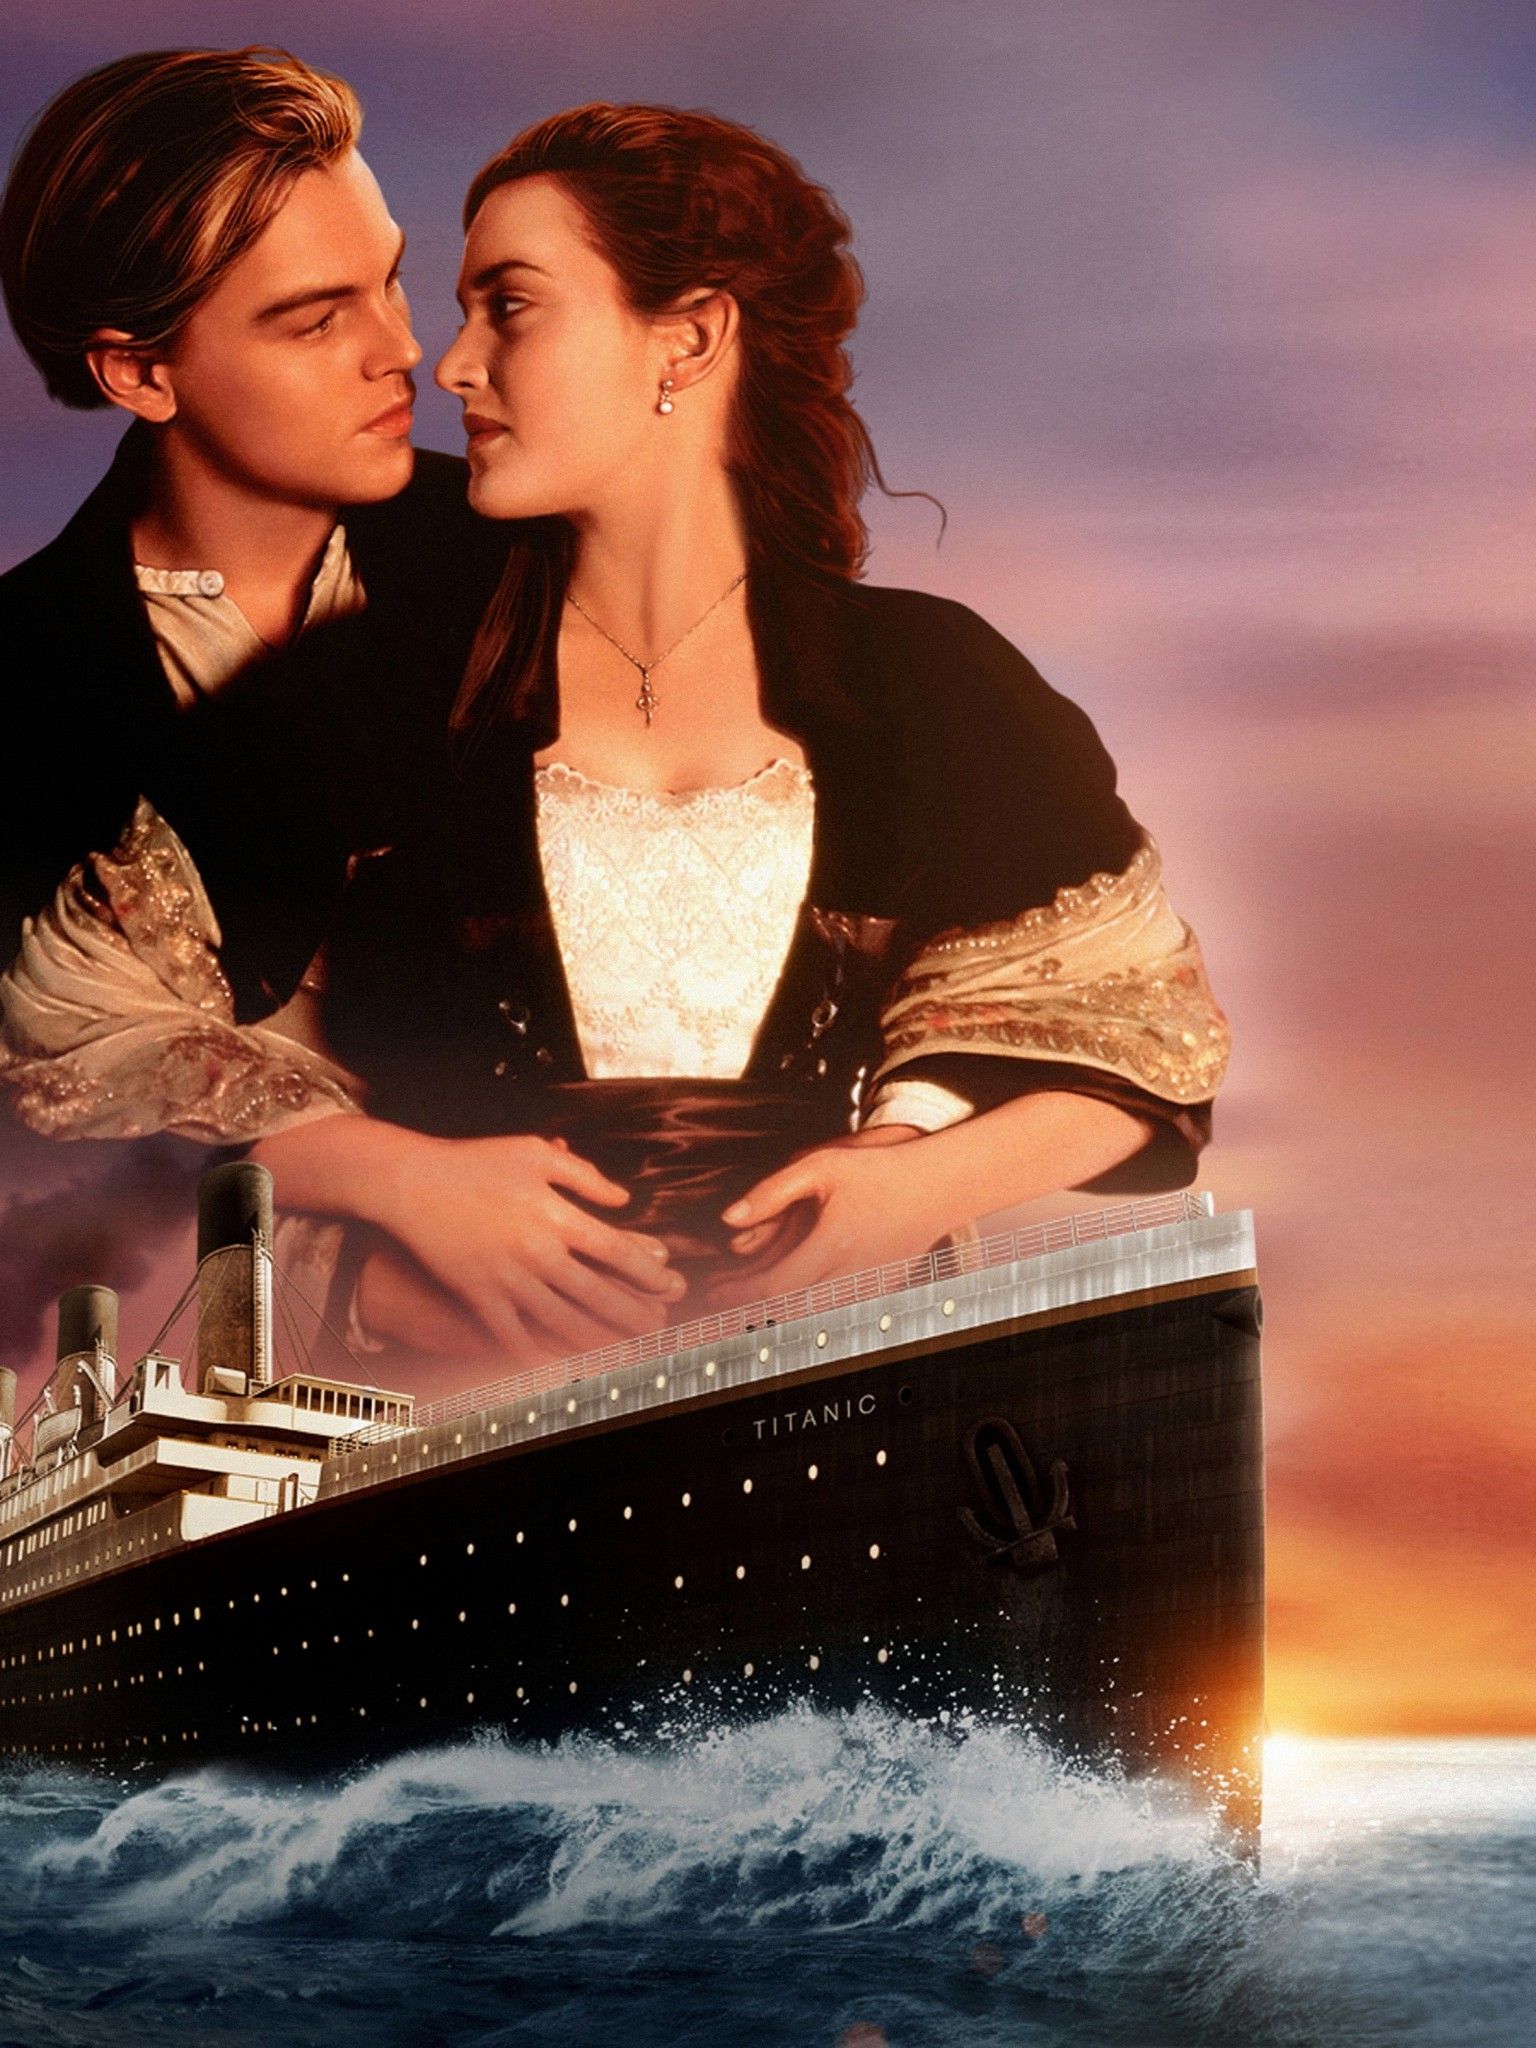 Wallpaper Titanic, Leonardo DiCaprio, Kate Winslet, HD, 4K, Movies,. Wallpaper for iPhone, Android, Mobile and Desktop